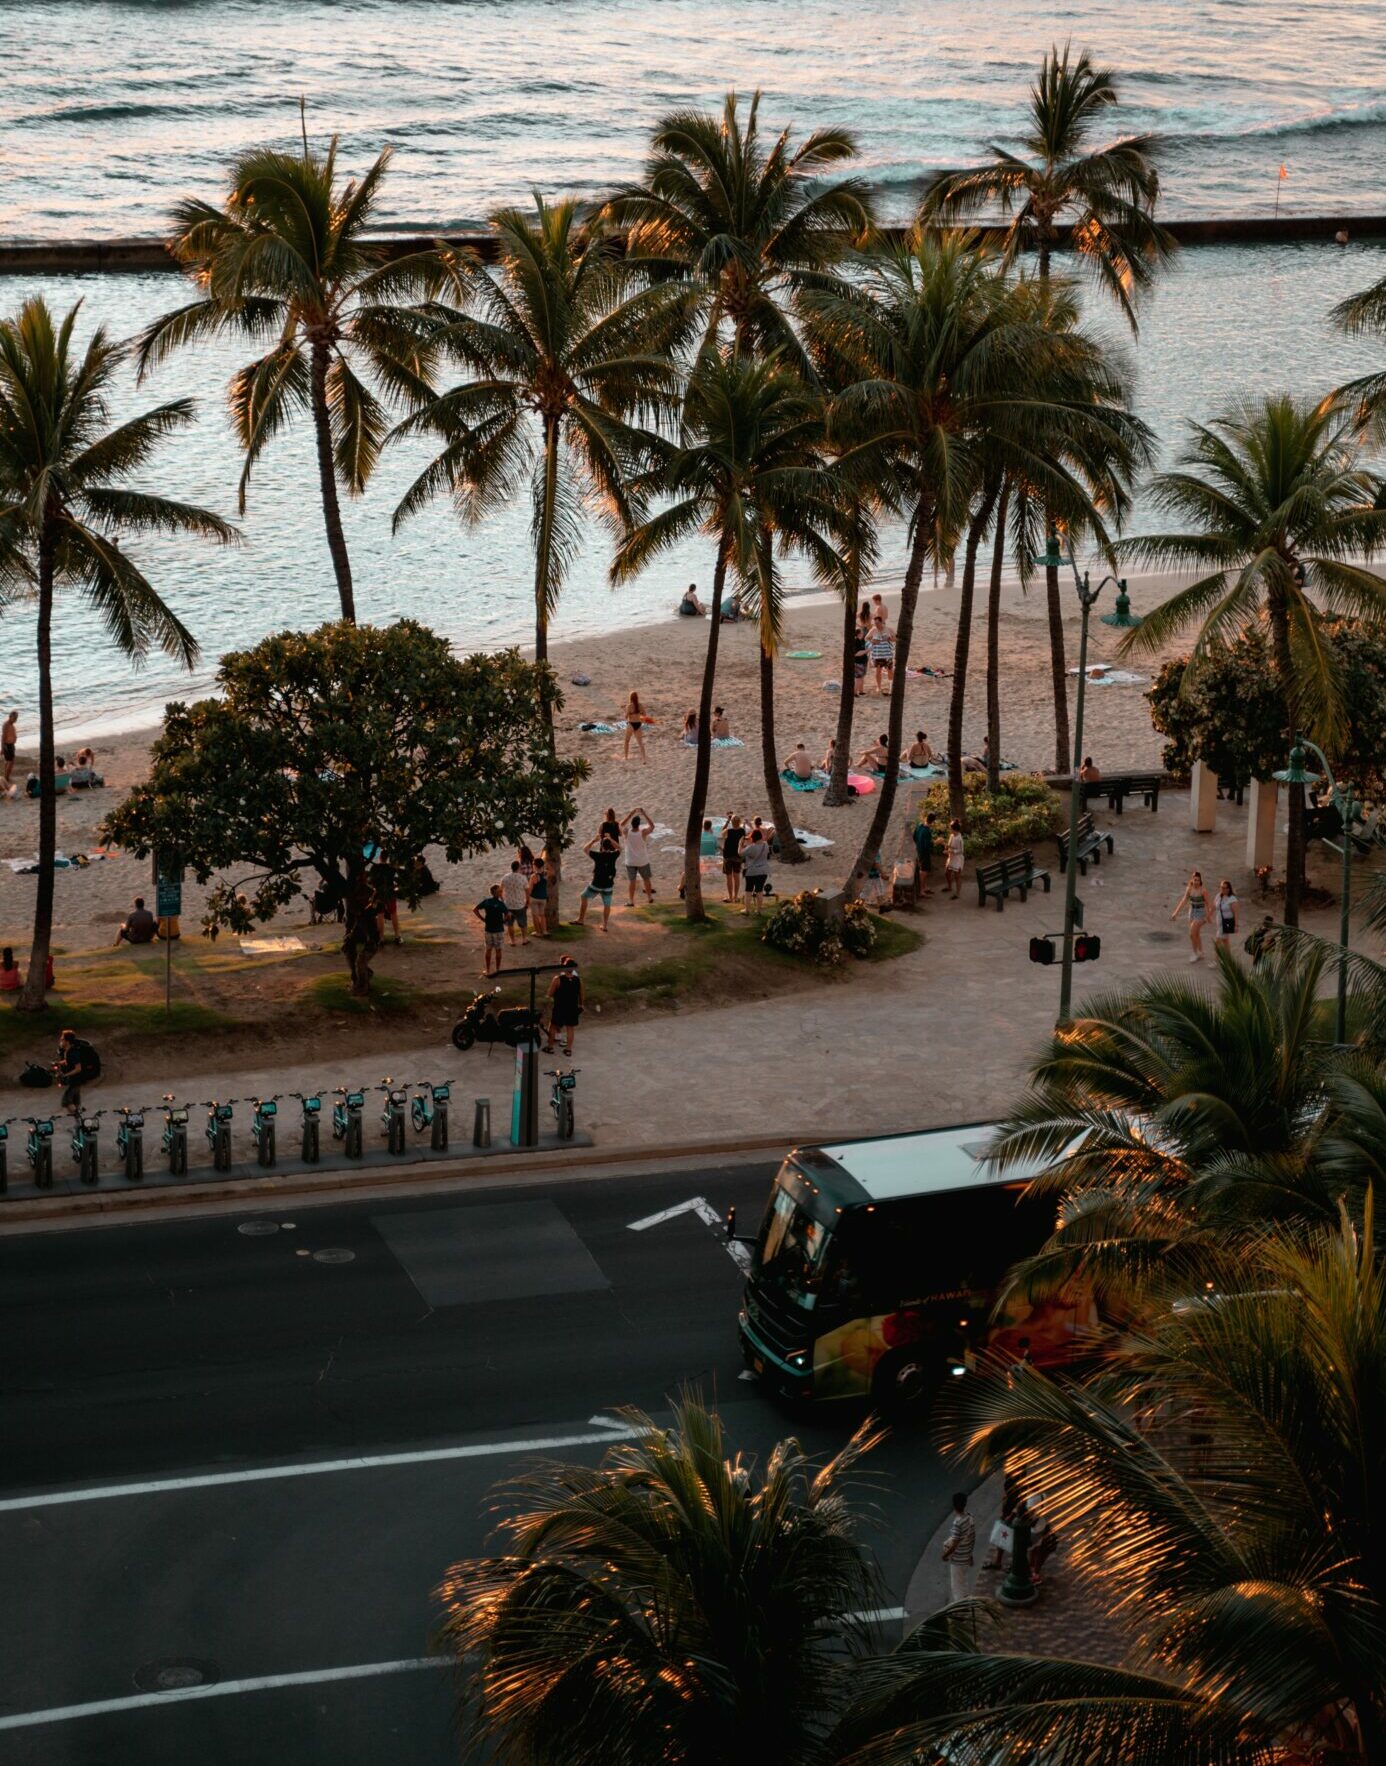 Bus, beach walk, and bikes, just a few of the Oahu transportation tips